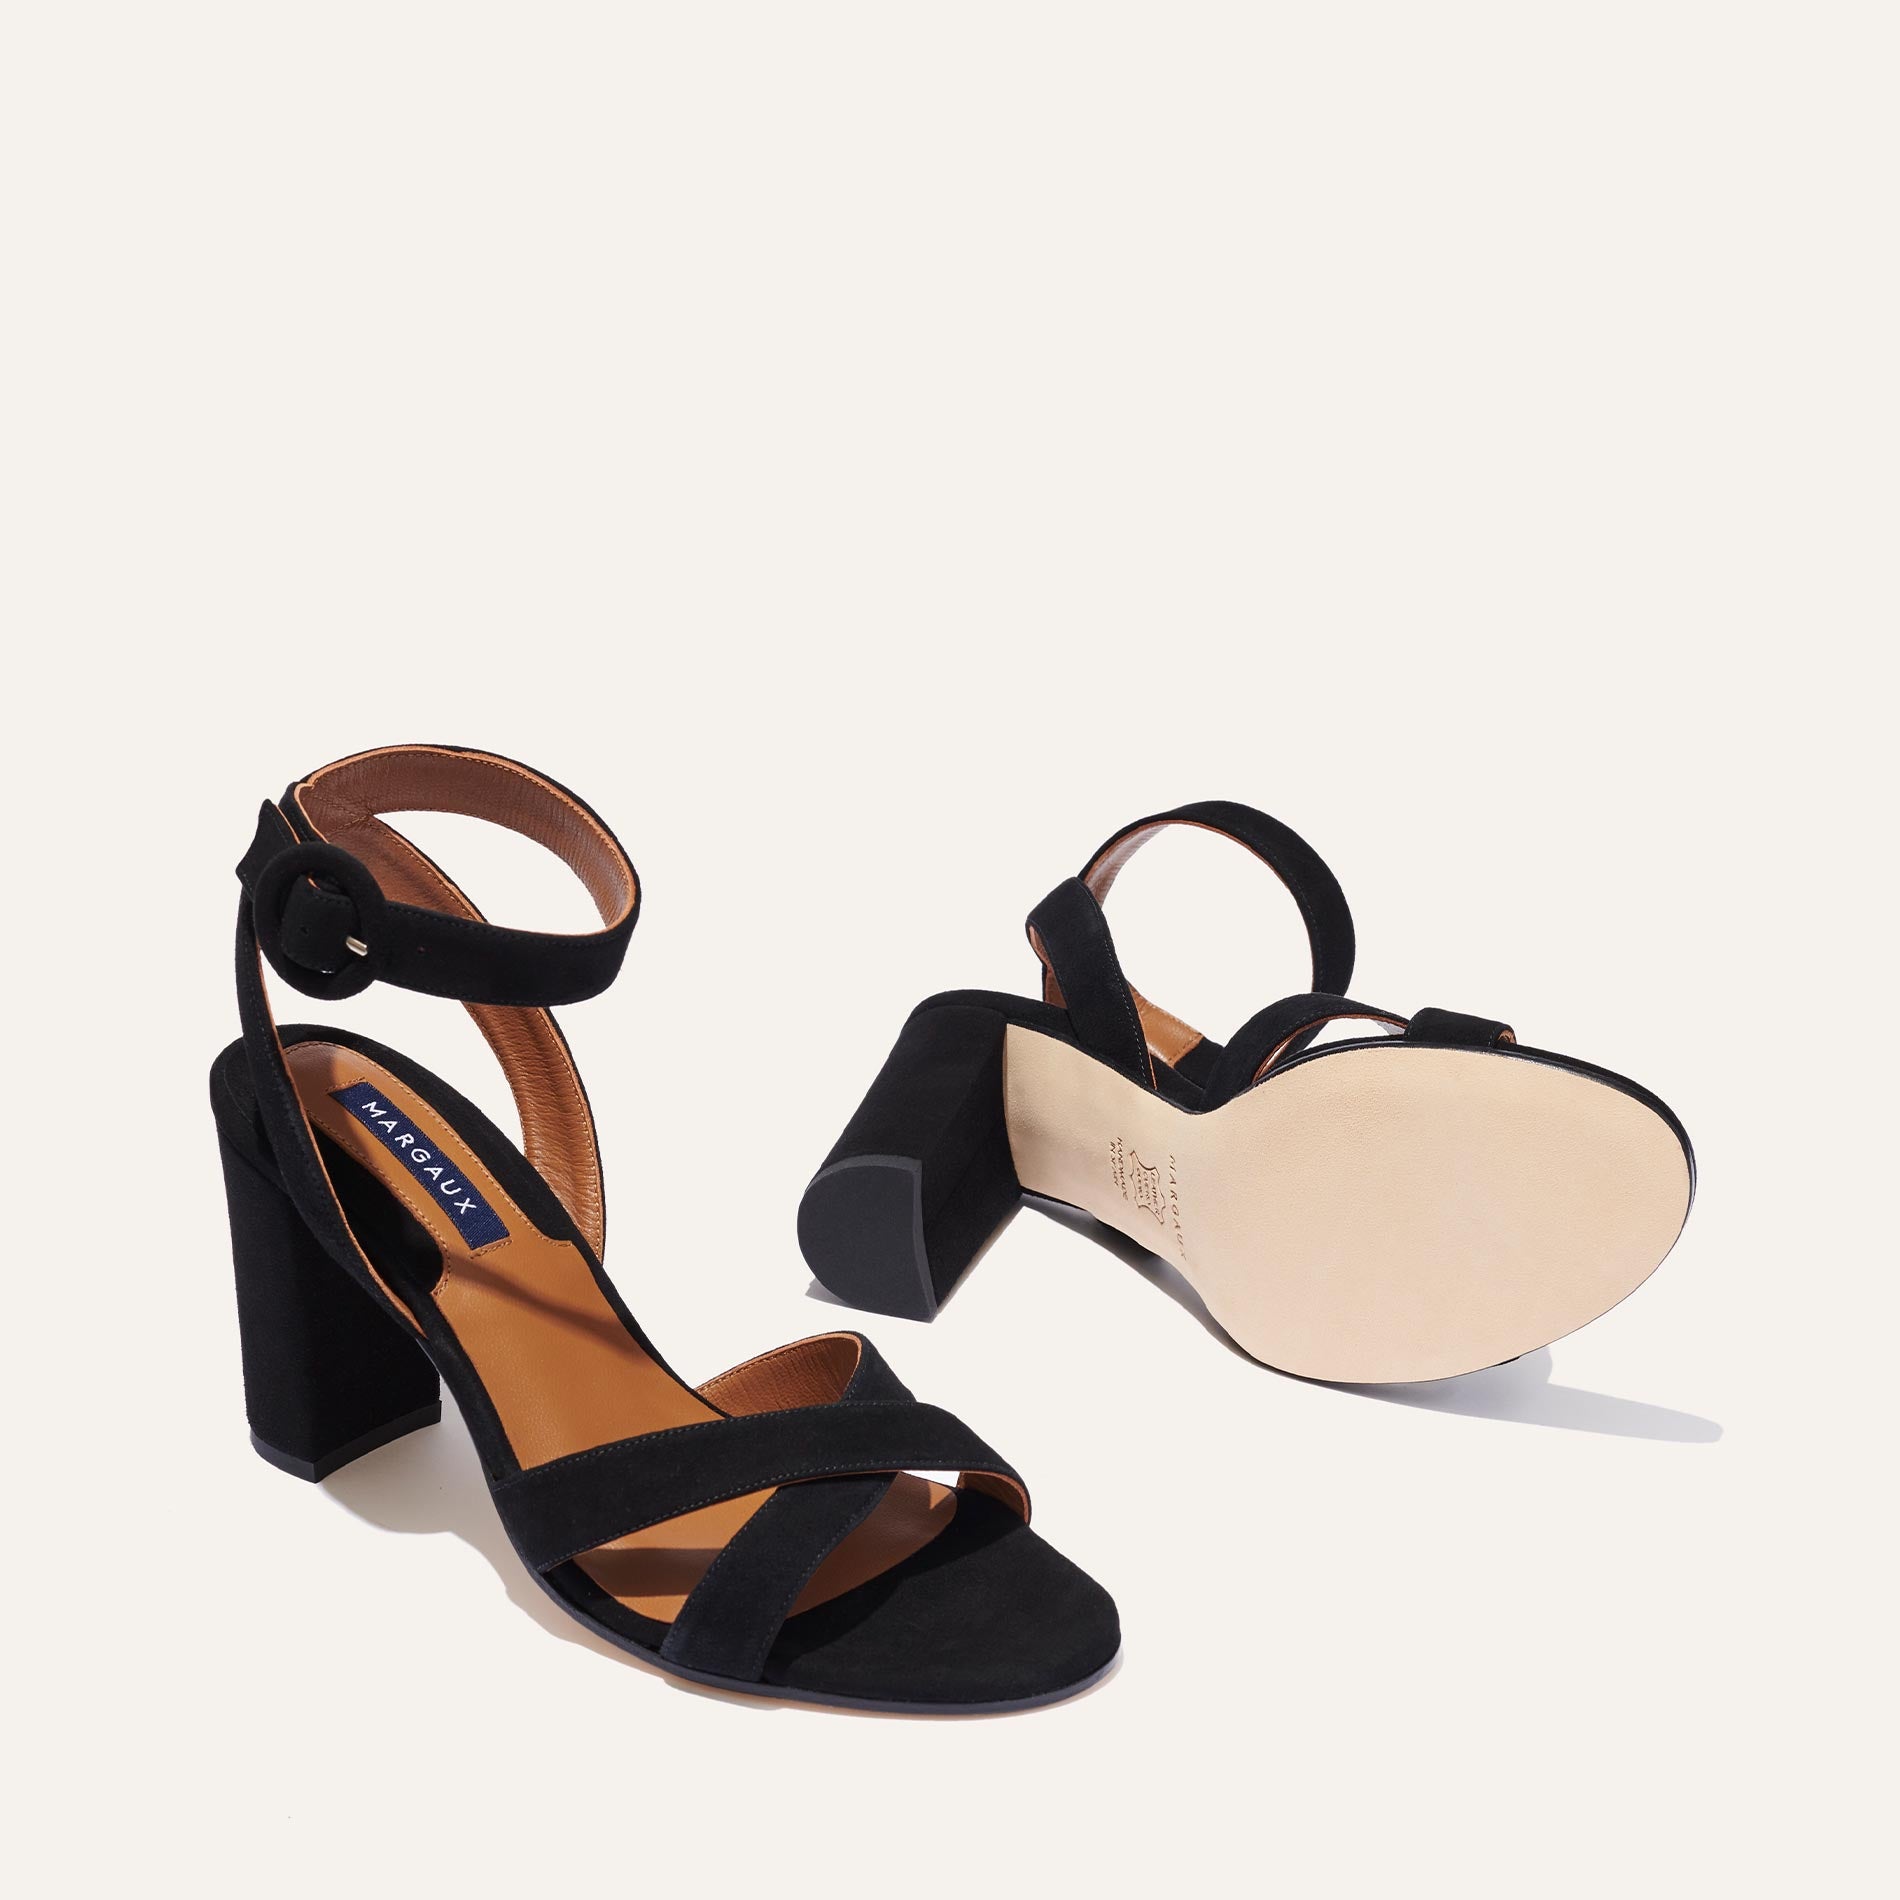 The Uptown Sandal - Black Suede